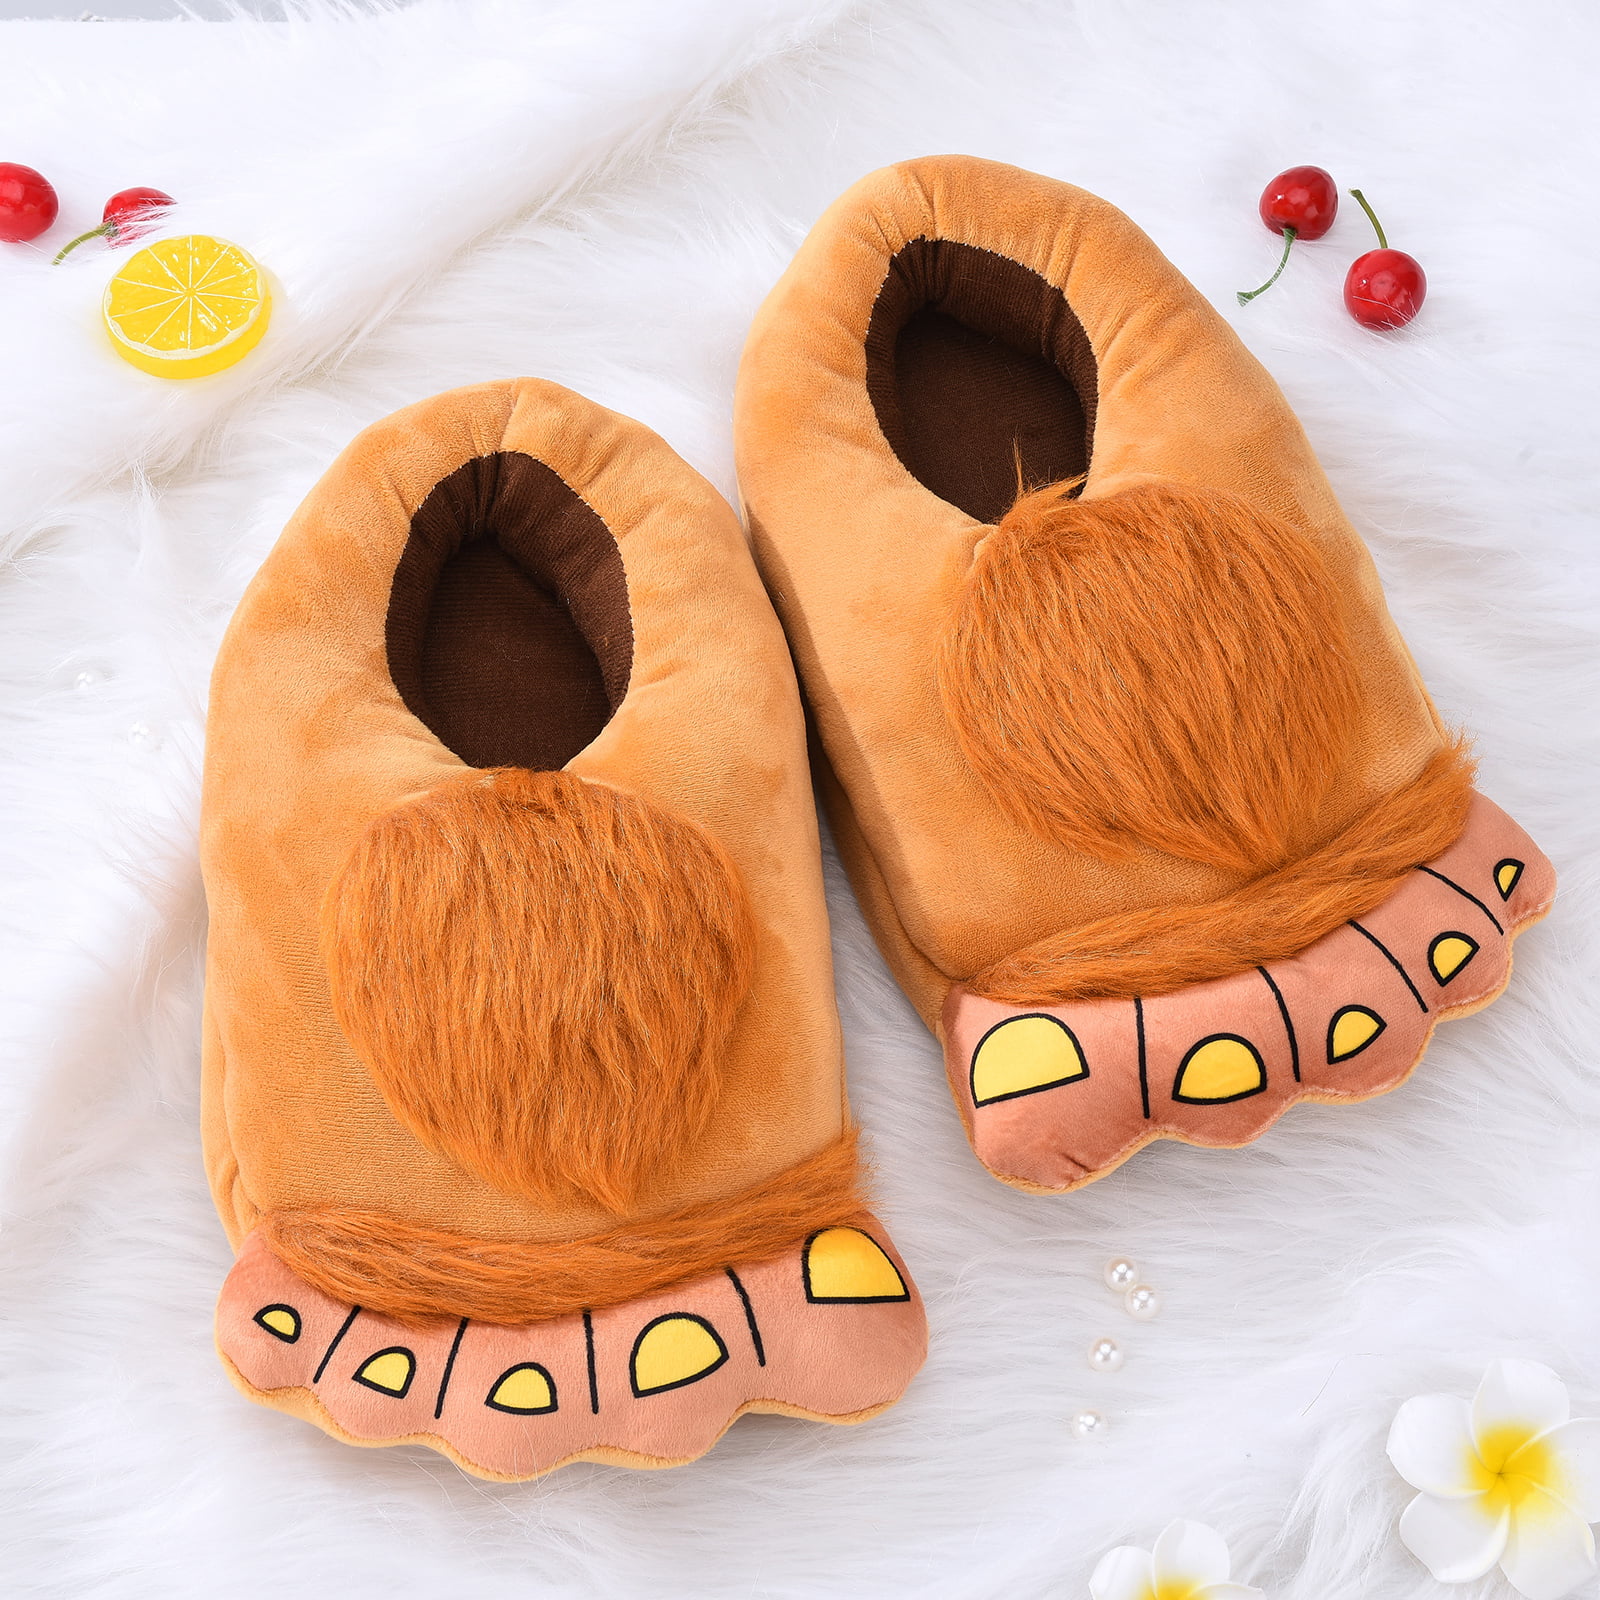 Retro Hobbit Great Foot Slippers Winter Home Savage Indoor Warm Slip-proof  Plush Cotton Slippers men women couples womens shoes